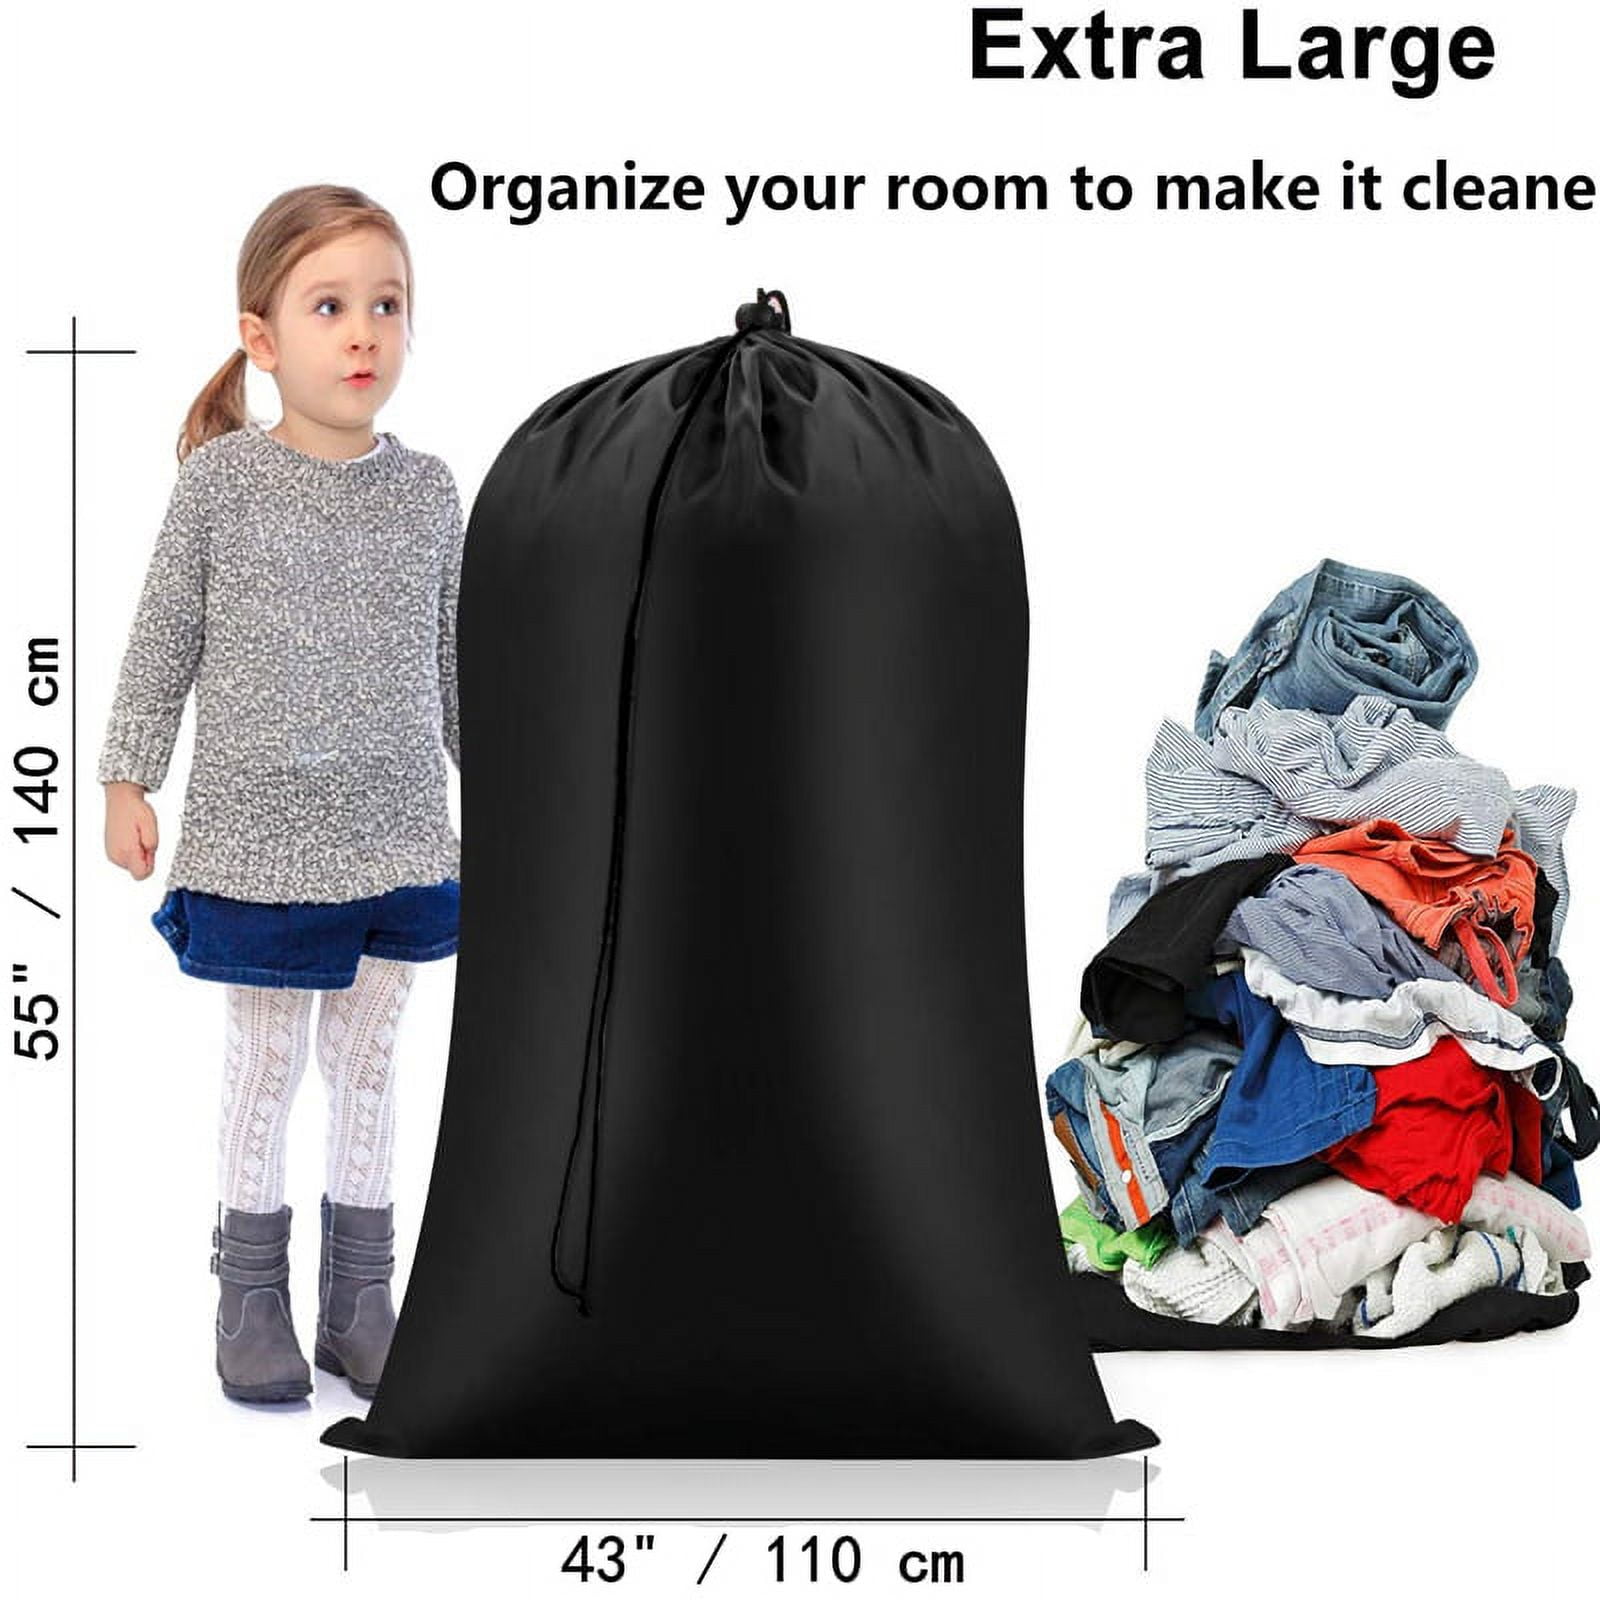 Heavy Duty Laundry Bag 115L, Sturdy Laundry Backpack Bag Extra Large, Dorm  Room Essential for Guys, …See more Heavy Duty Laundry Bag 115L, Sturdy